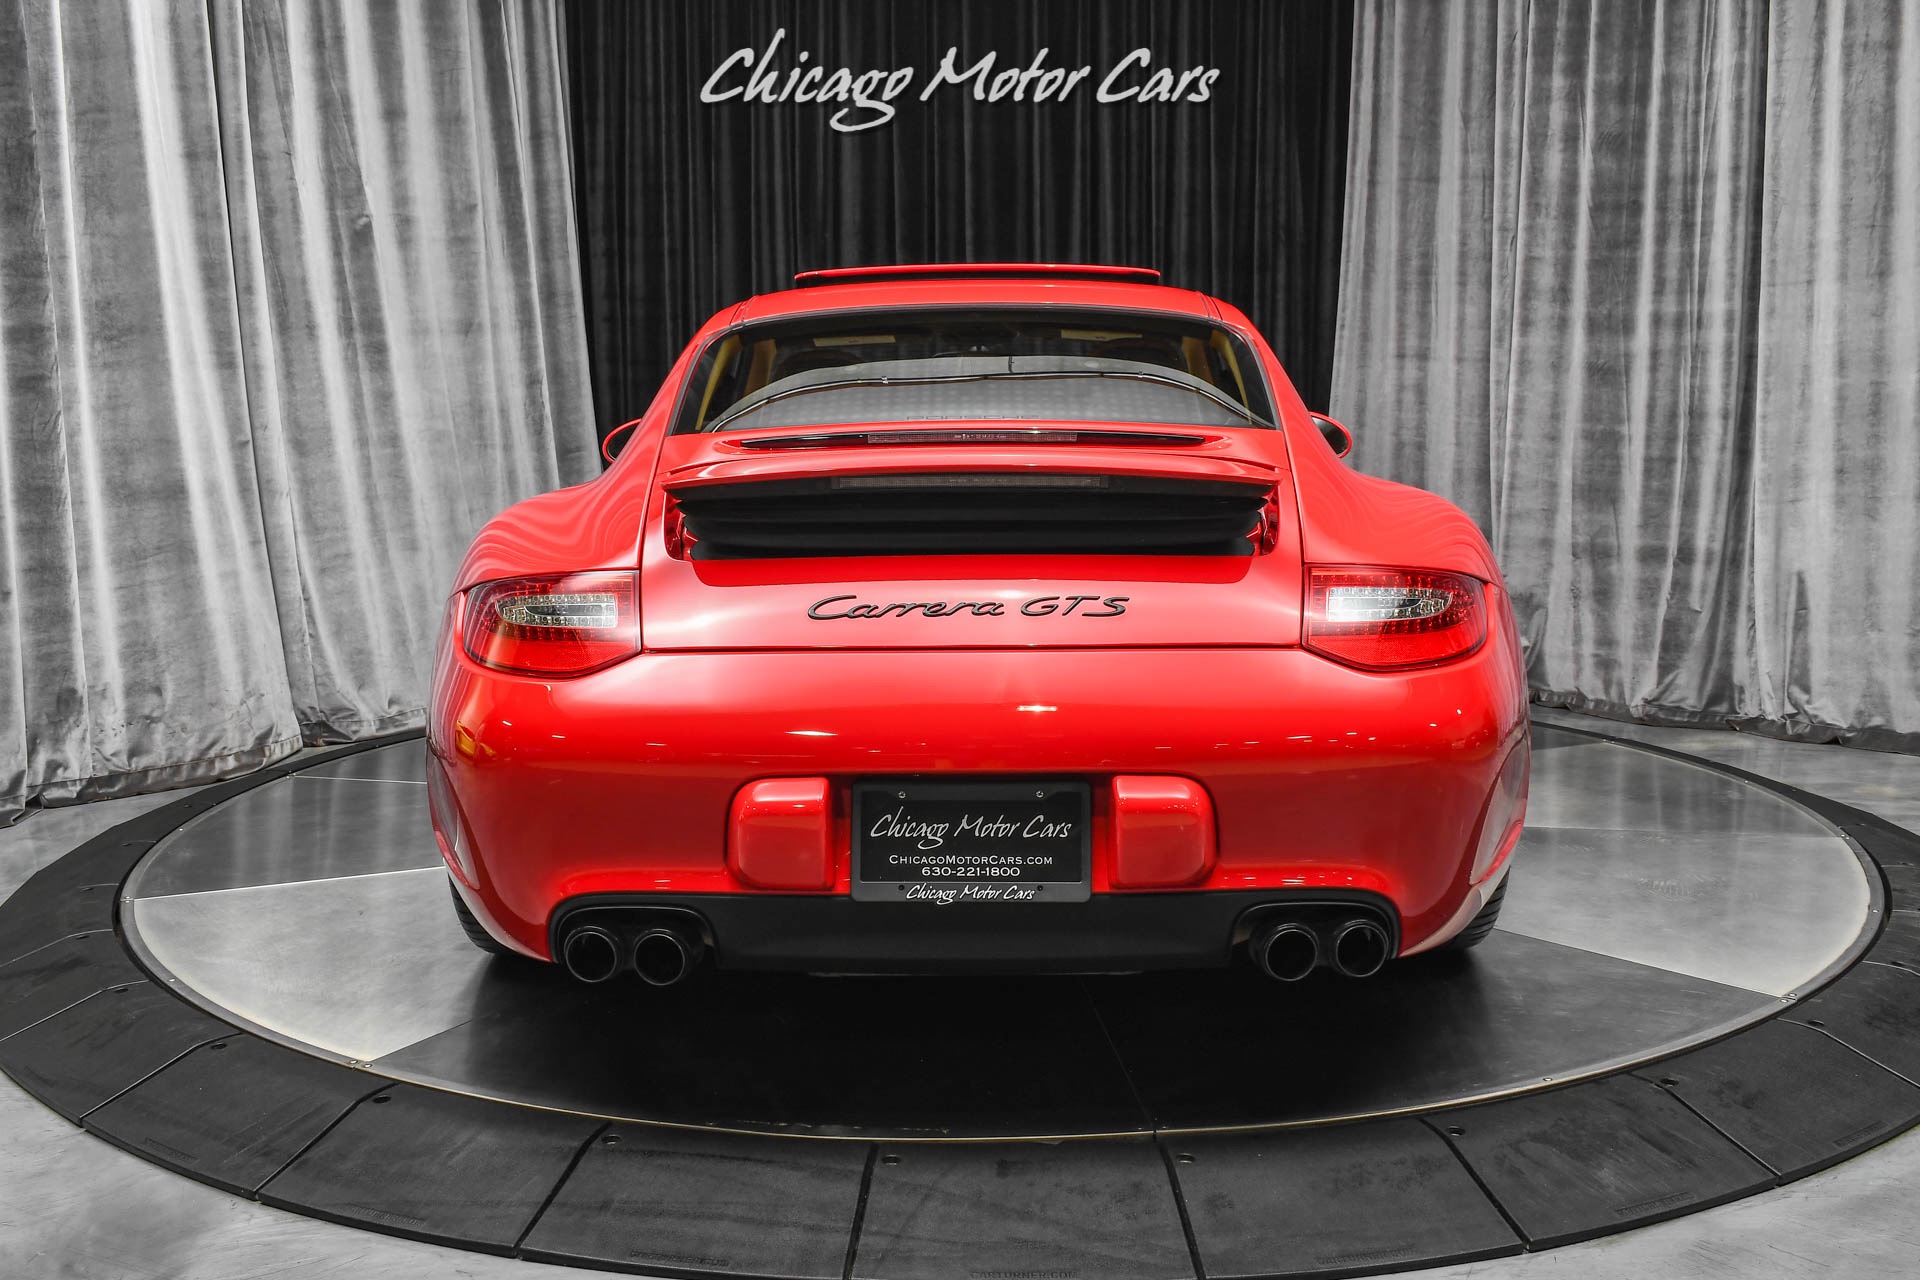 Used-2012-Porsche-911-GTS-Coupe-Only-16k-Miles-Guards-Red-LOADED-Center-Lock-Wheels-Serviced